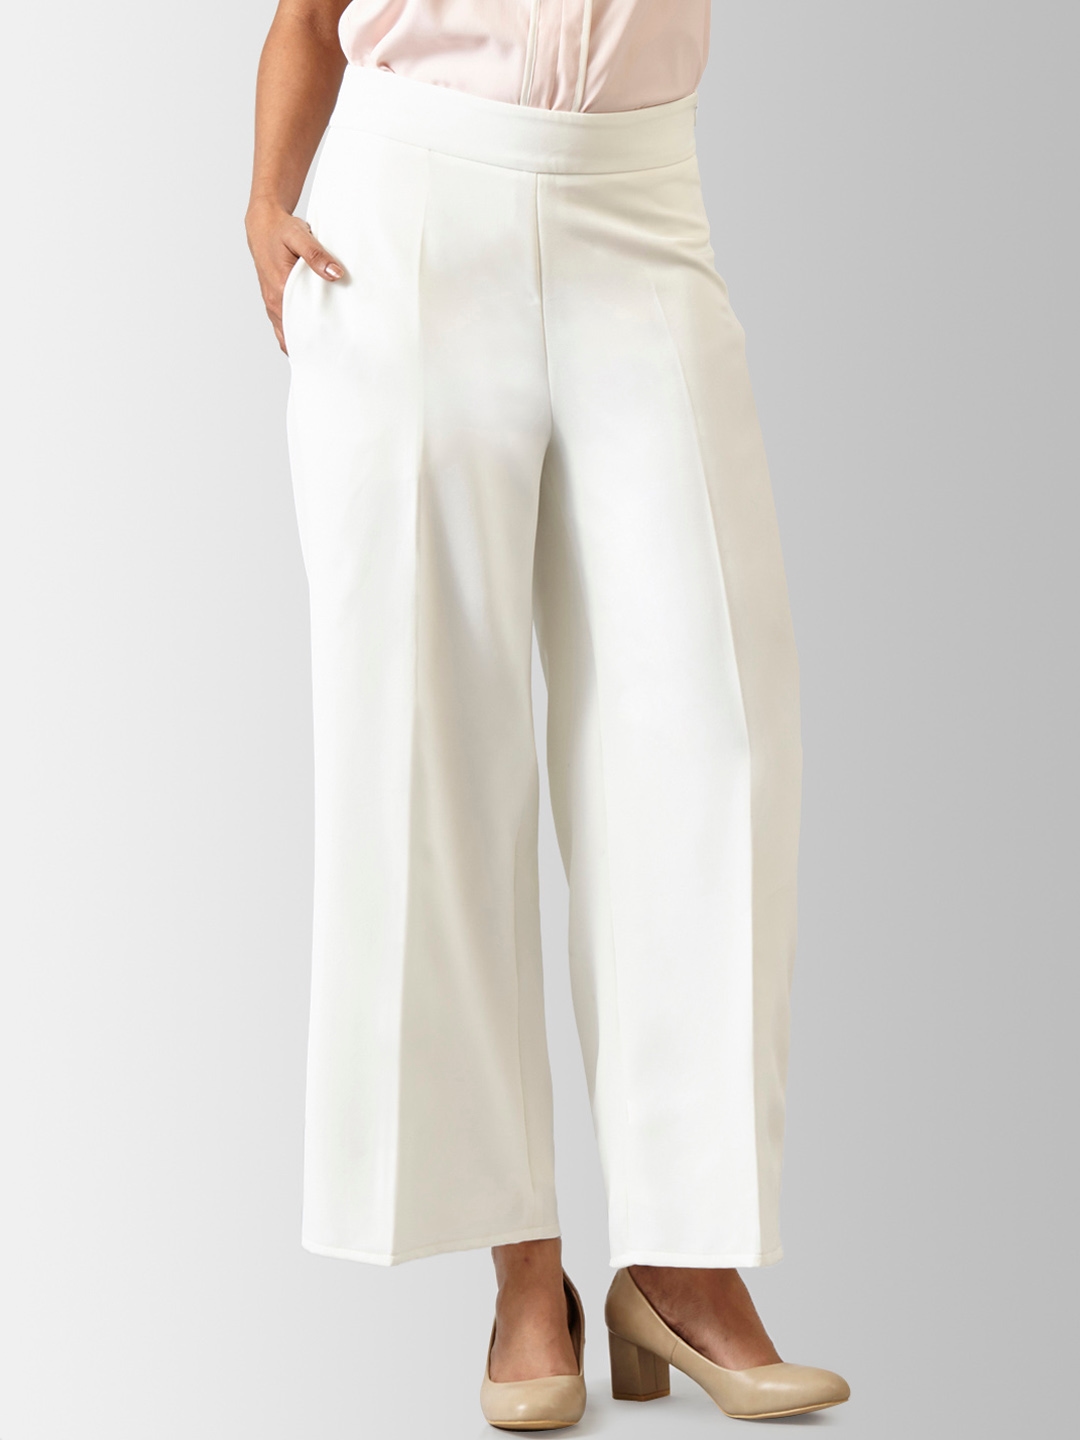 Explore more than 119 fablestreet trousers super hot